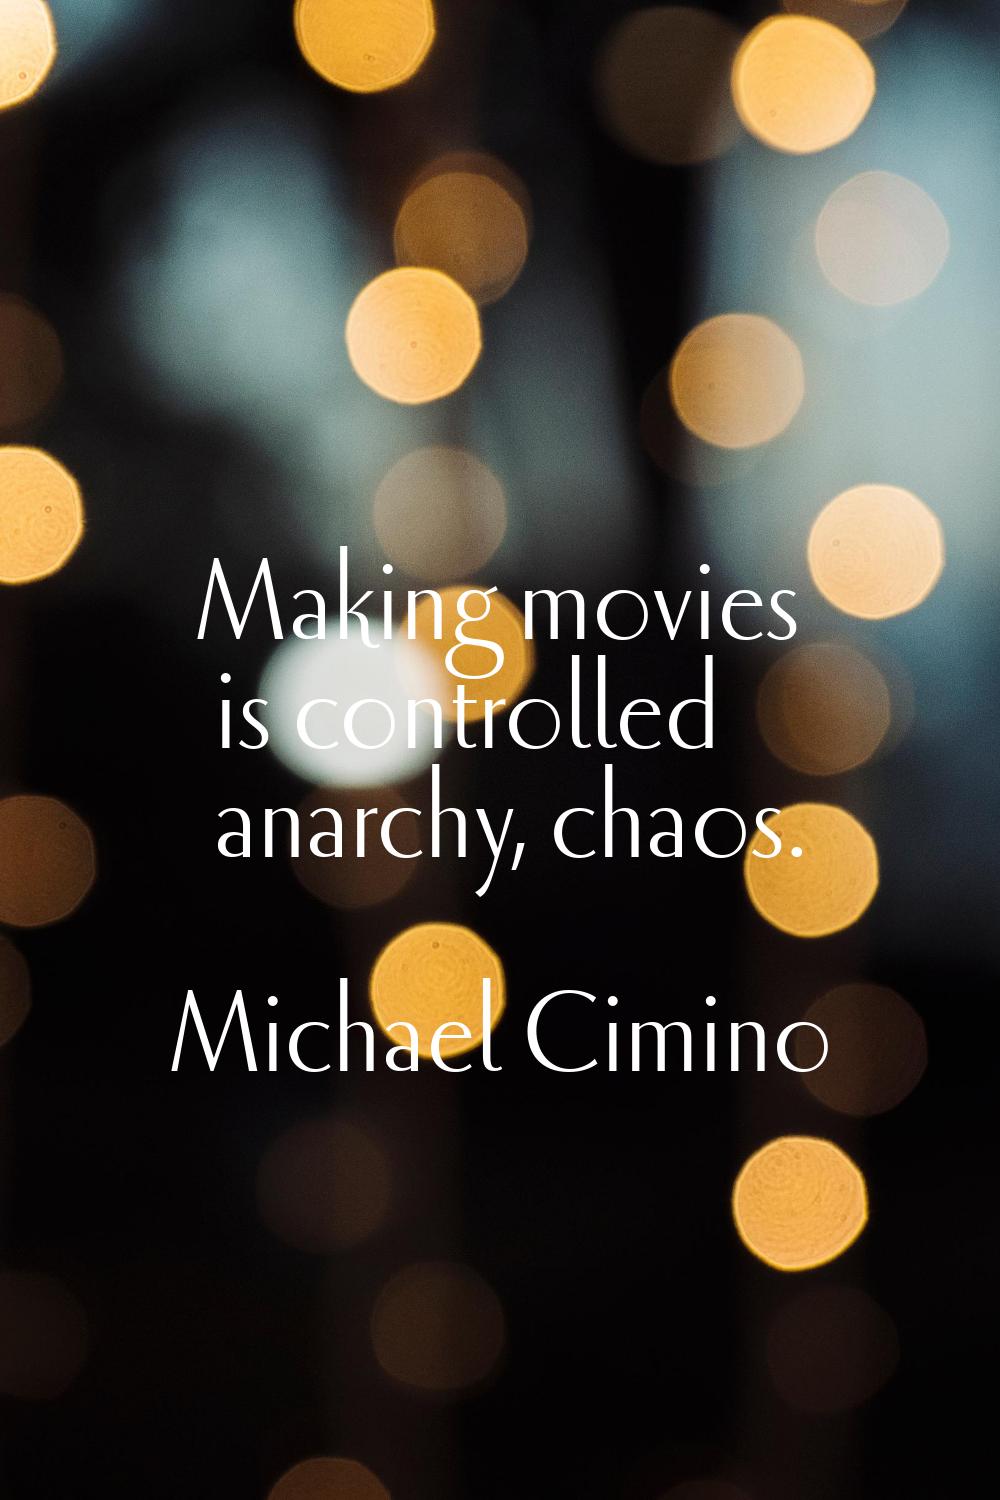 Making movies is controlled anarchy, chaos.